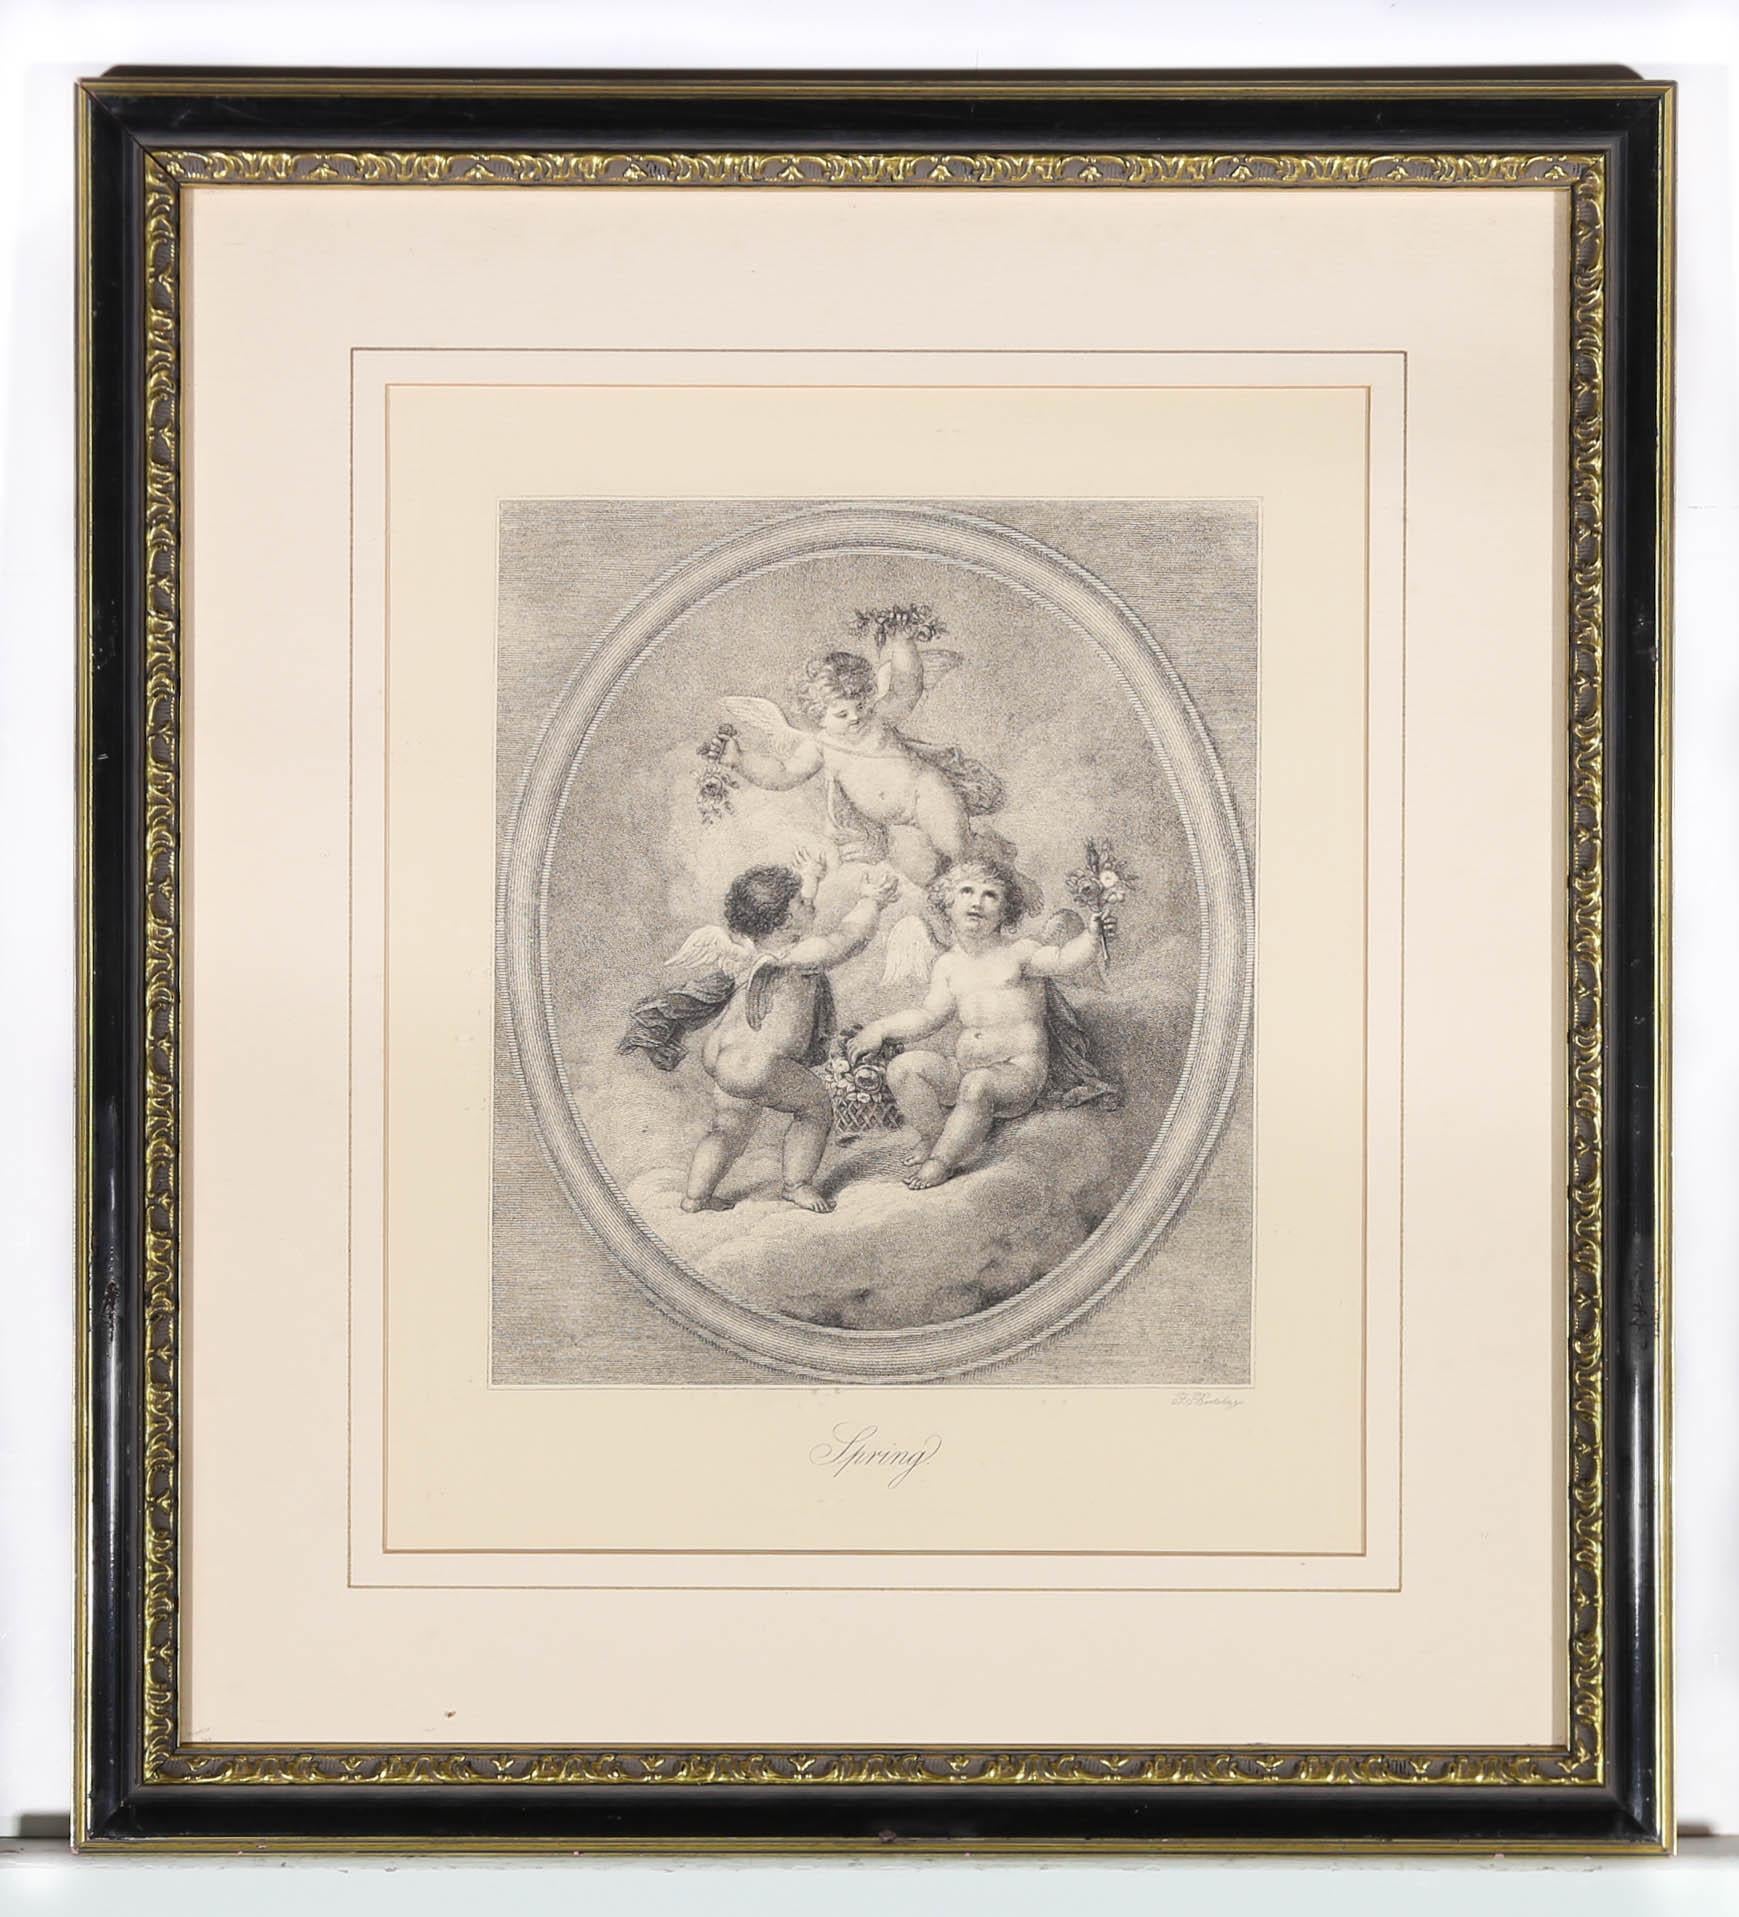 A handsomely presented pair of 19th Century re-strikes from the original plates by Francesco Bartolozzi. The pair show the seasons of Spring and Summer represented by putti, holding aloft nests of baby birds and sprigs of flowers and blossoms. The